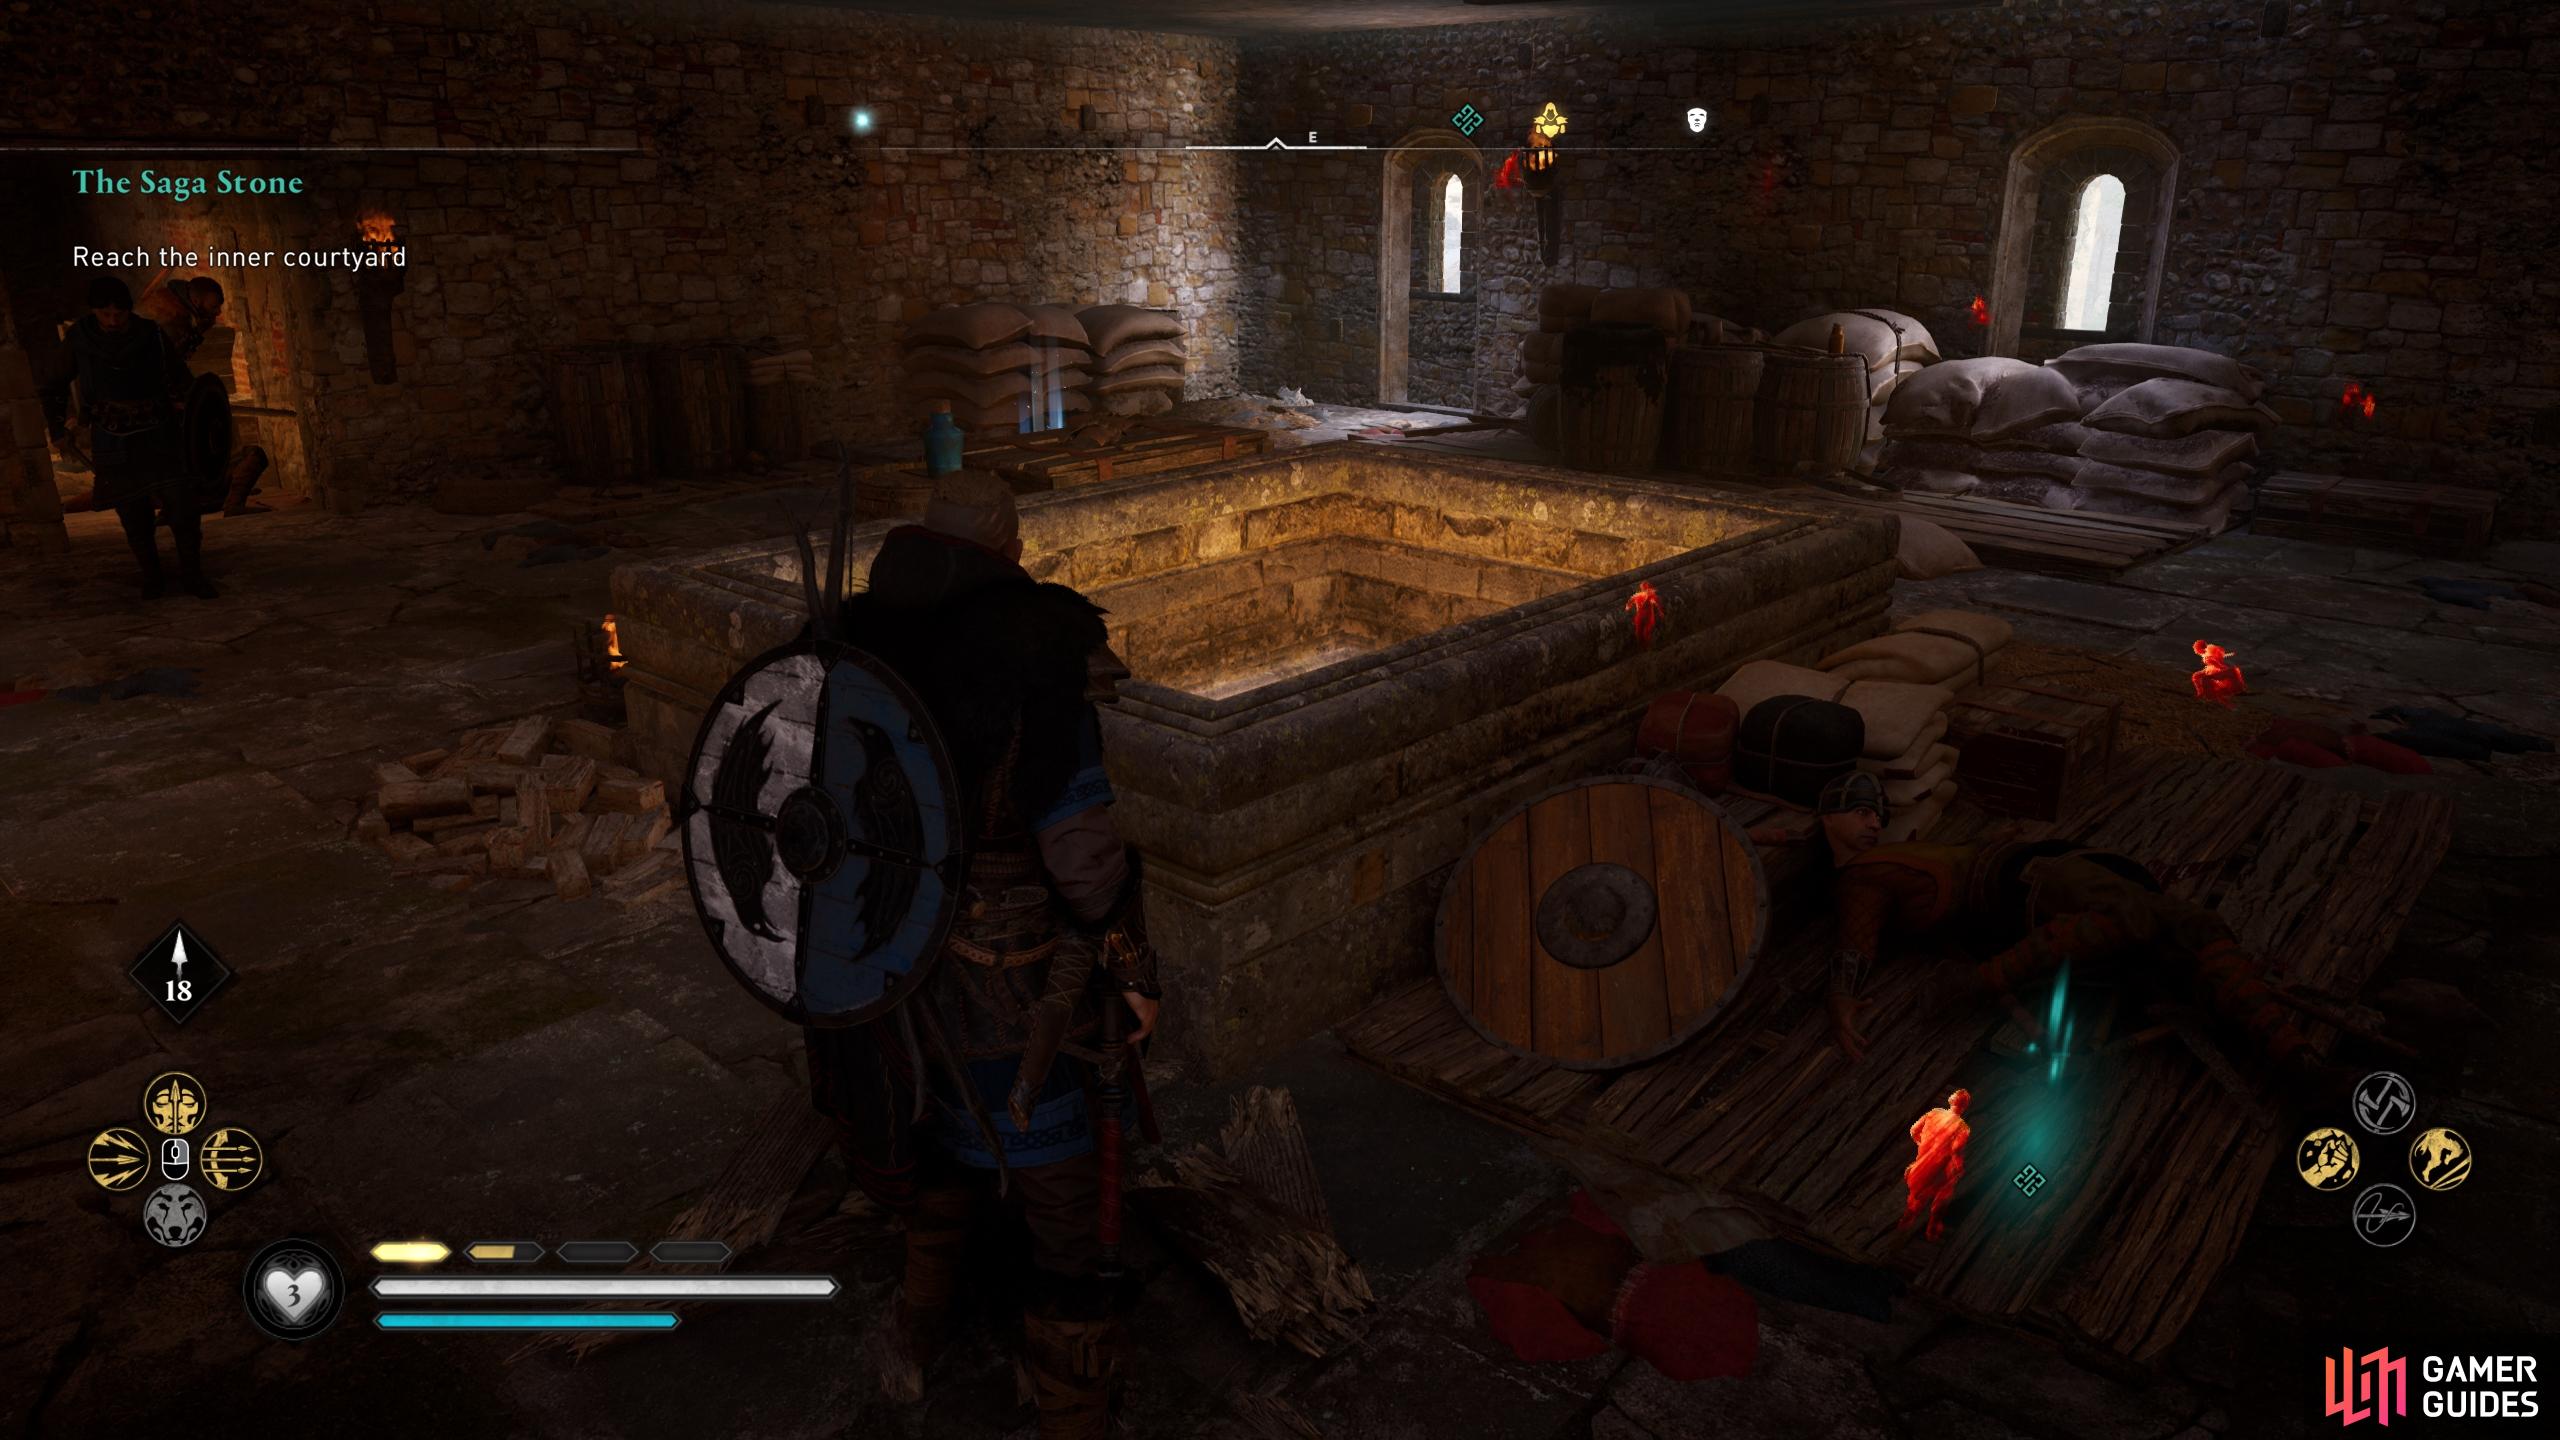 You can jump down the hole in the portcullis room to reach the inner courtyard quickly.